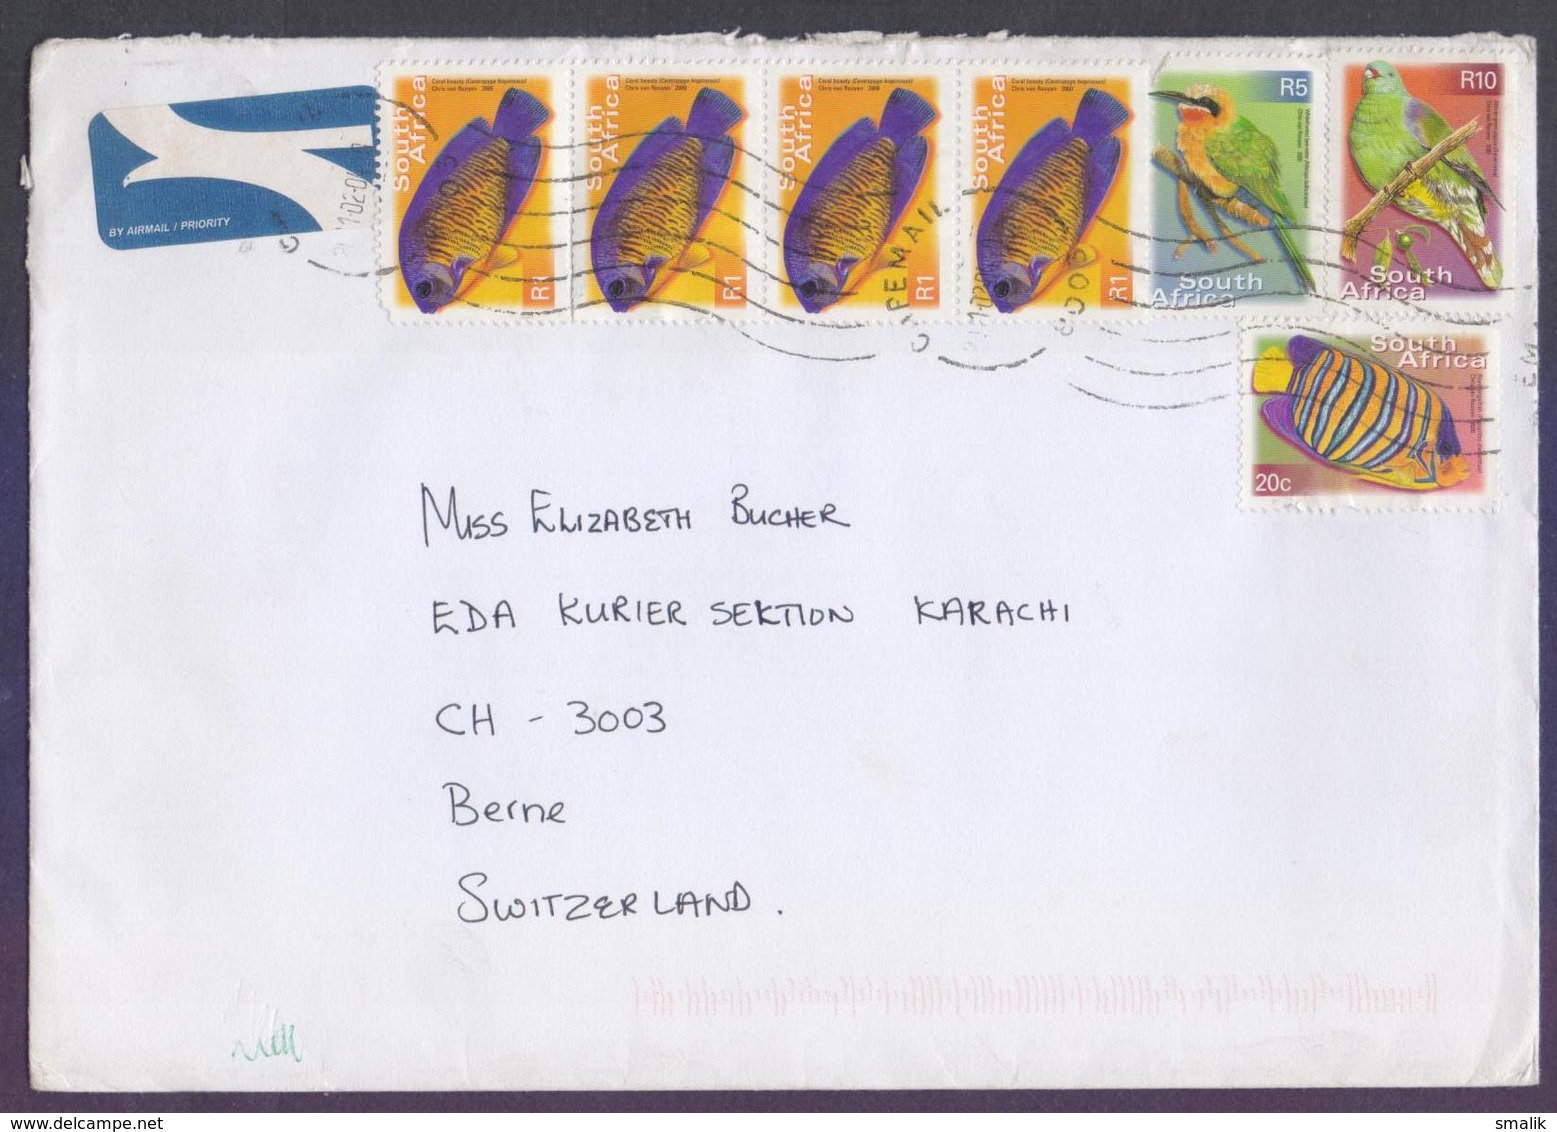 Birds, Tropical Fishes, Postal History Big Cover From SOUTH AFRICA, Used 2004 - Lettres & Documents